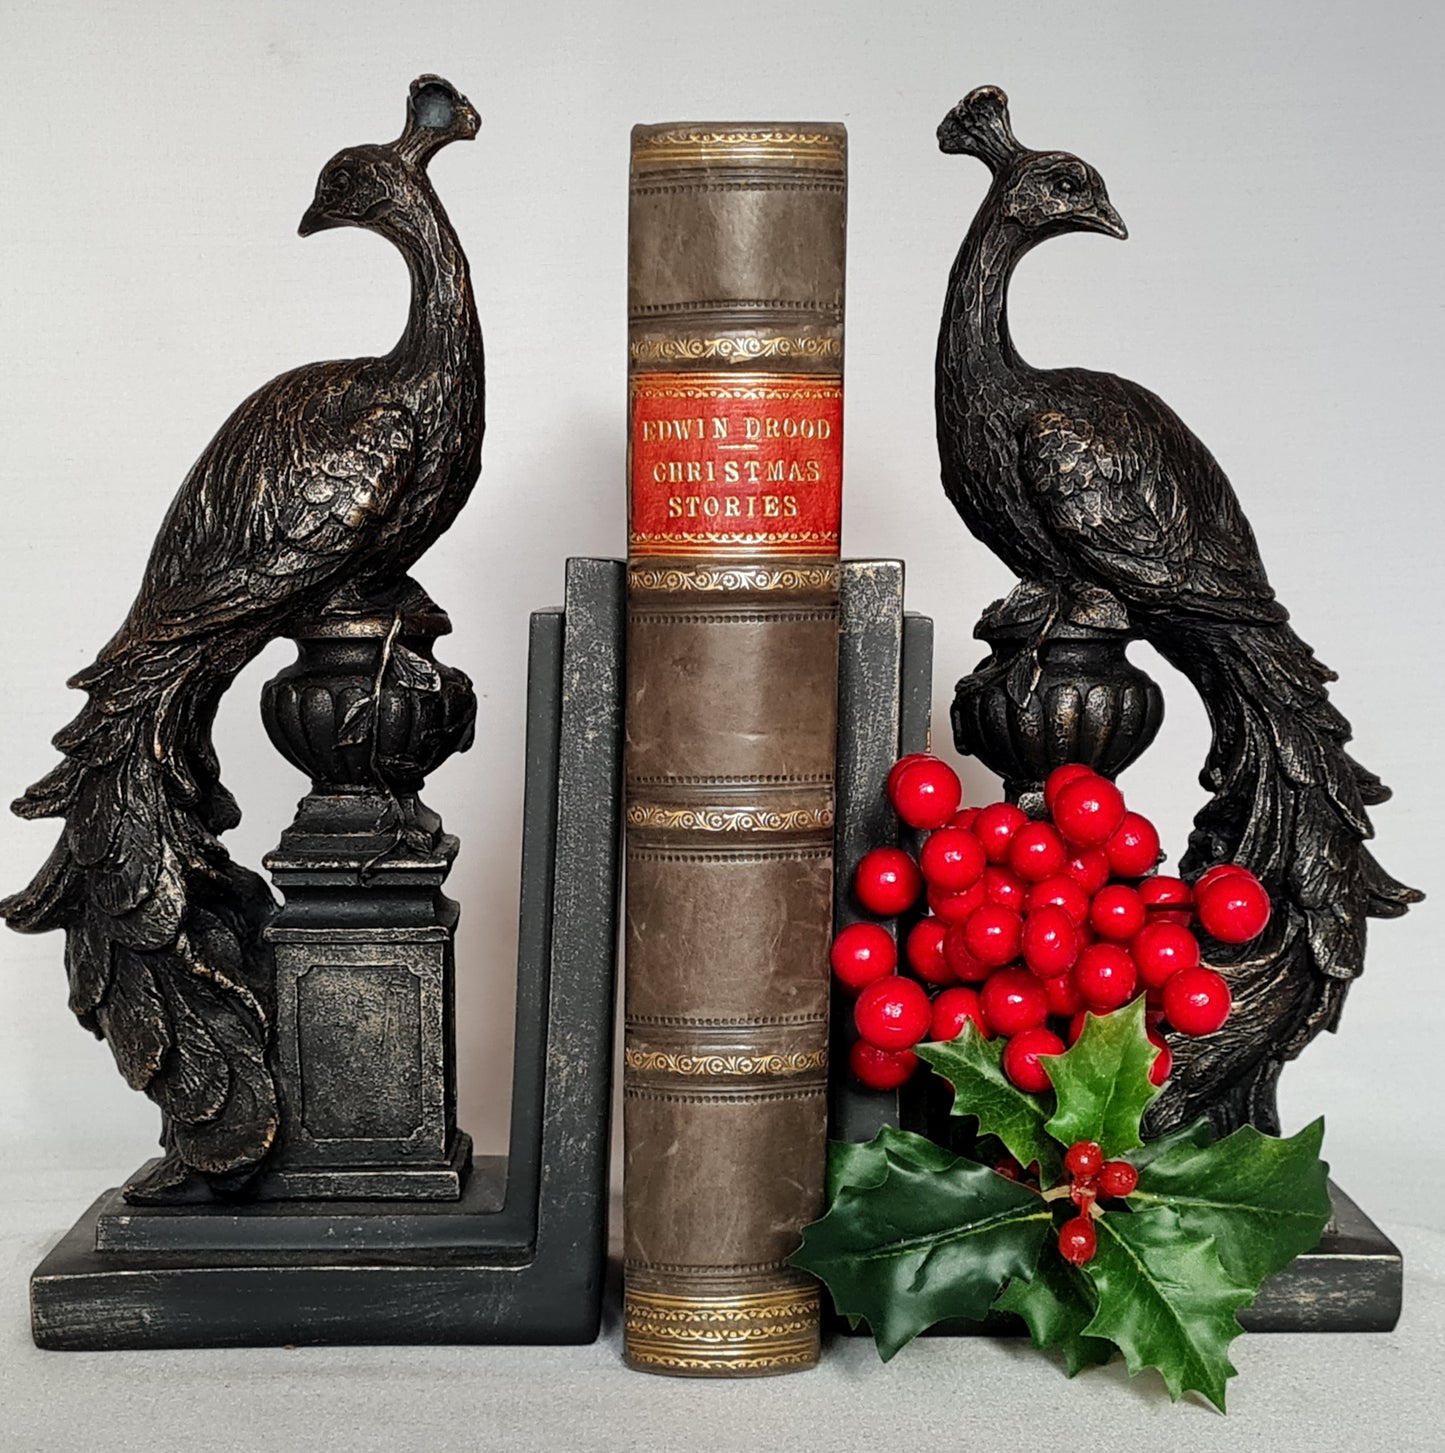 1880 Christmas Stories by Charles Dickens also Bound With The Mystery of Edwin Drood etc. / NOT A Christmas Carol / Illustrated Antique Book